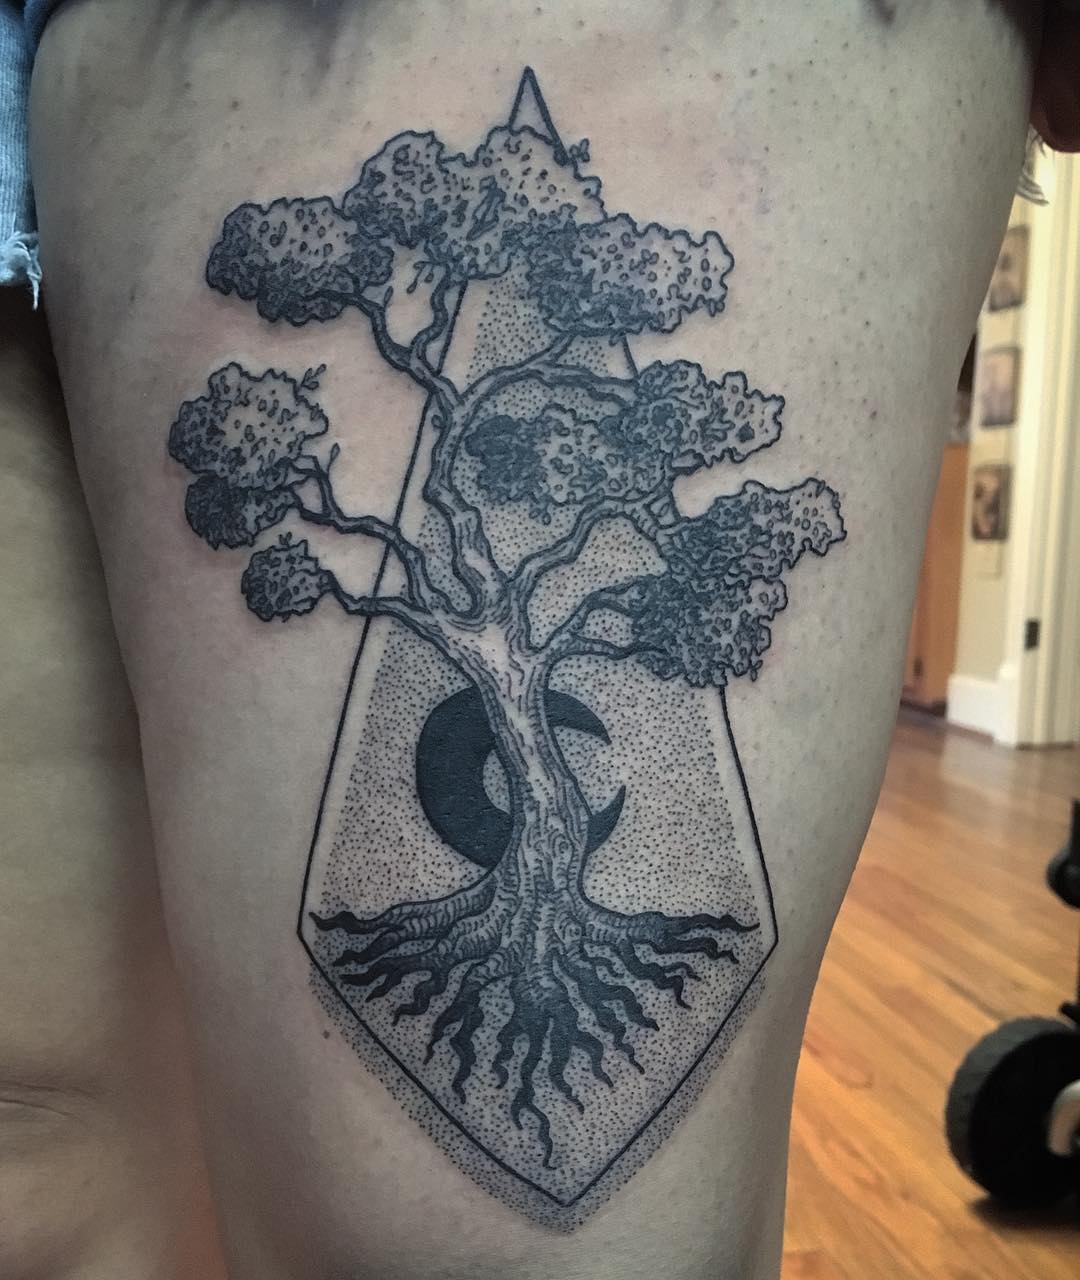 The Spiritual Journey Of Getting A Tree Tattoo.